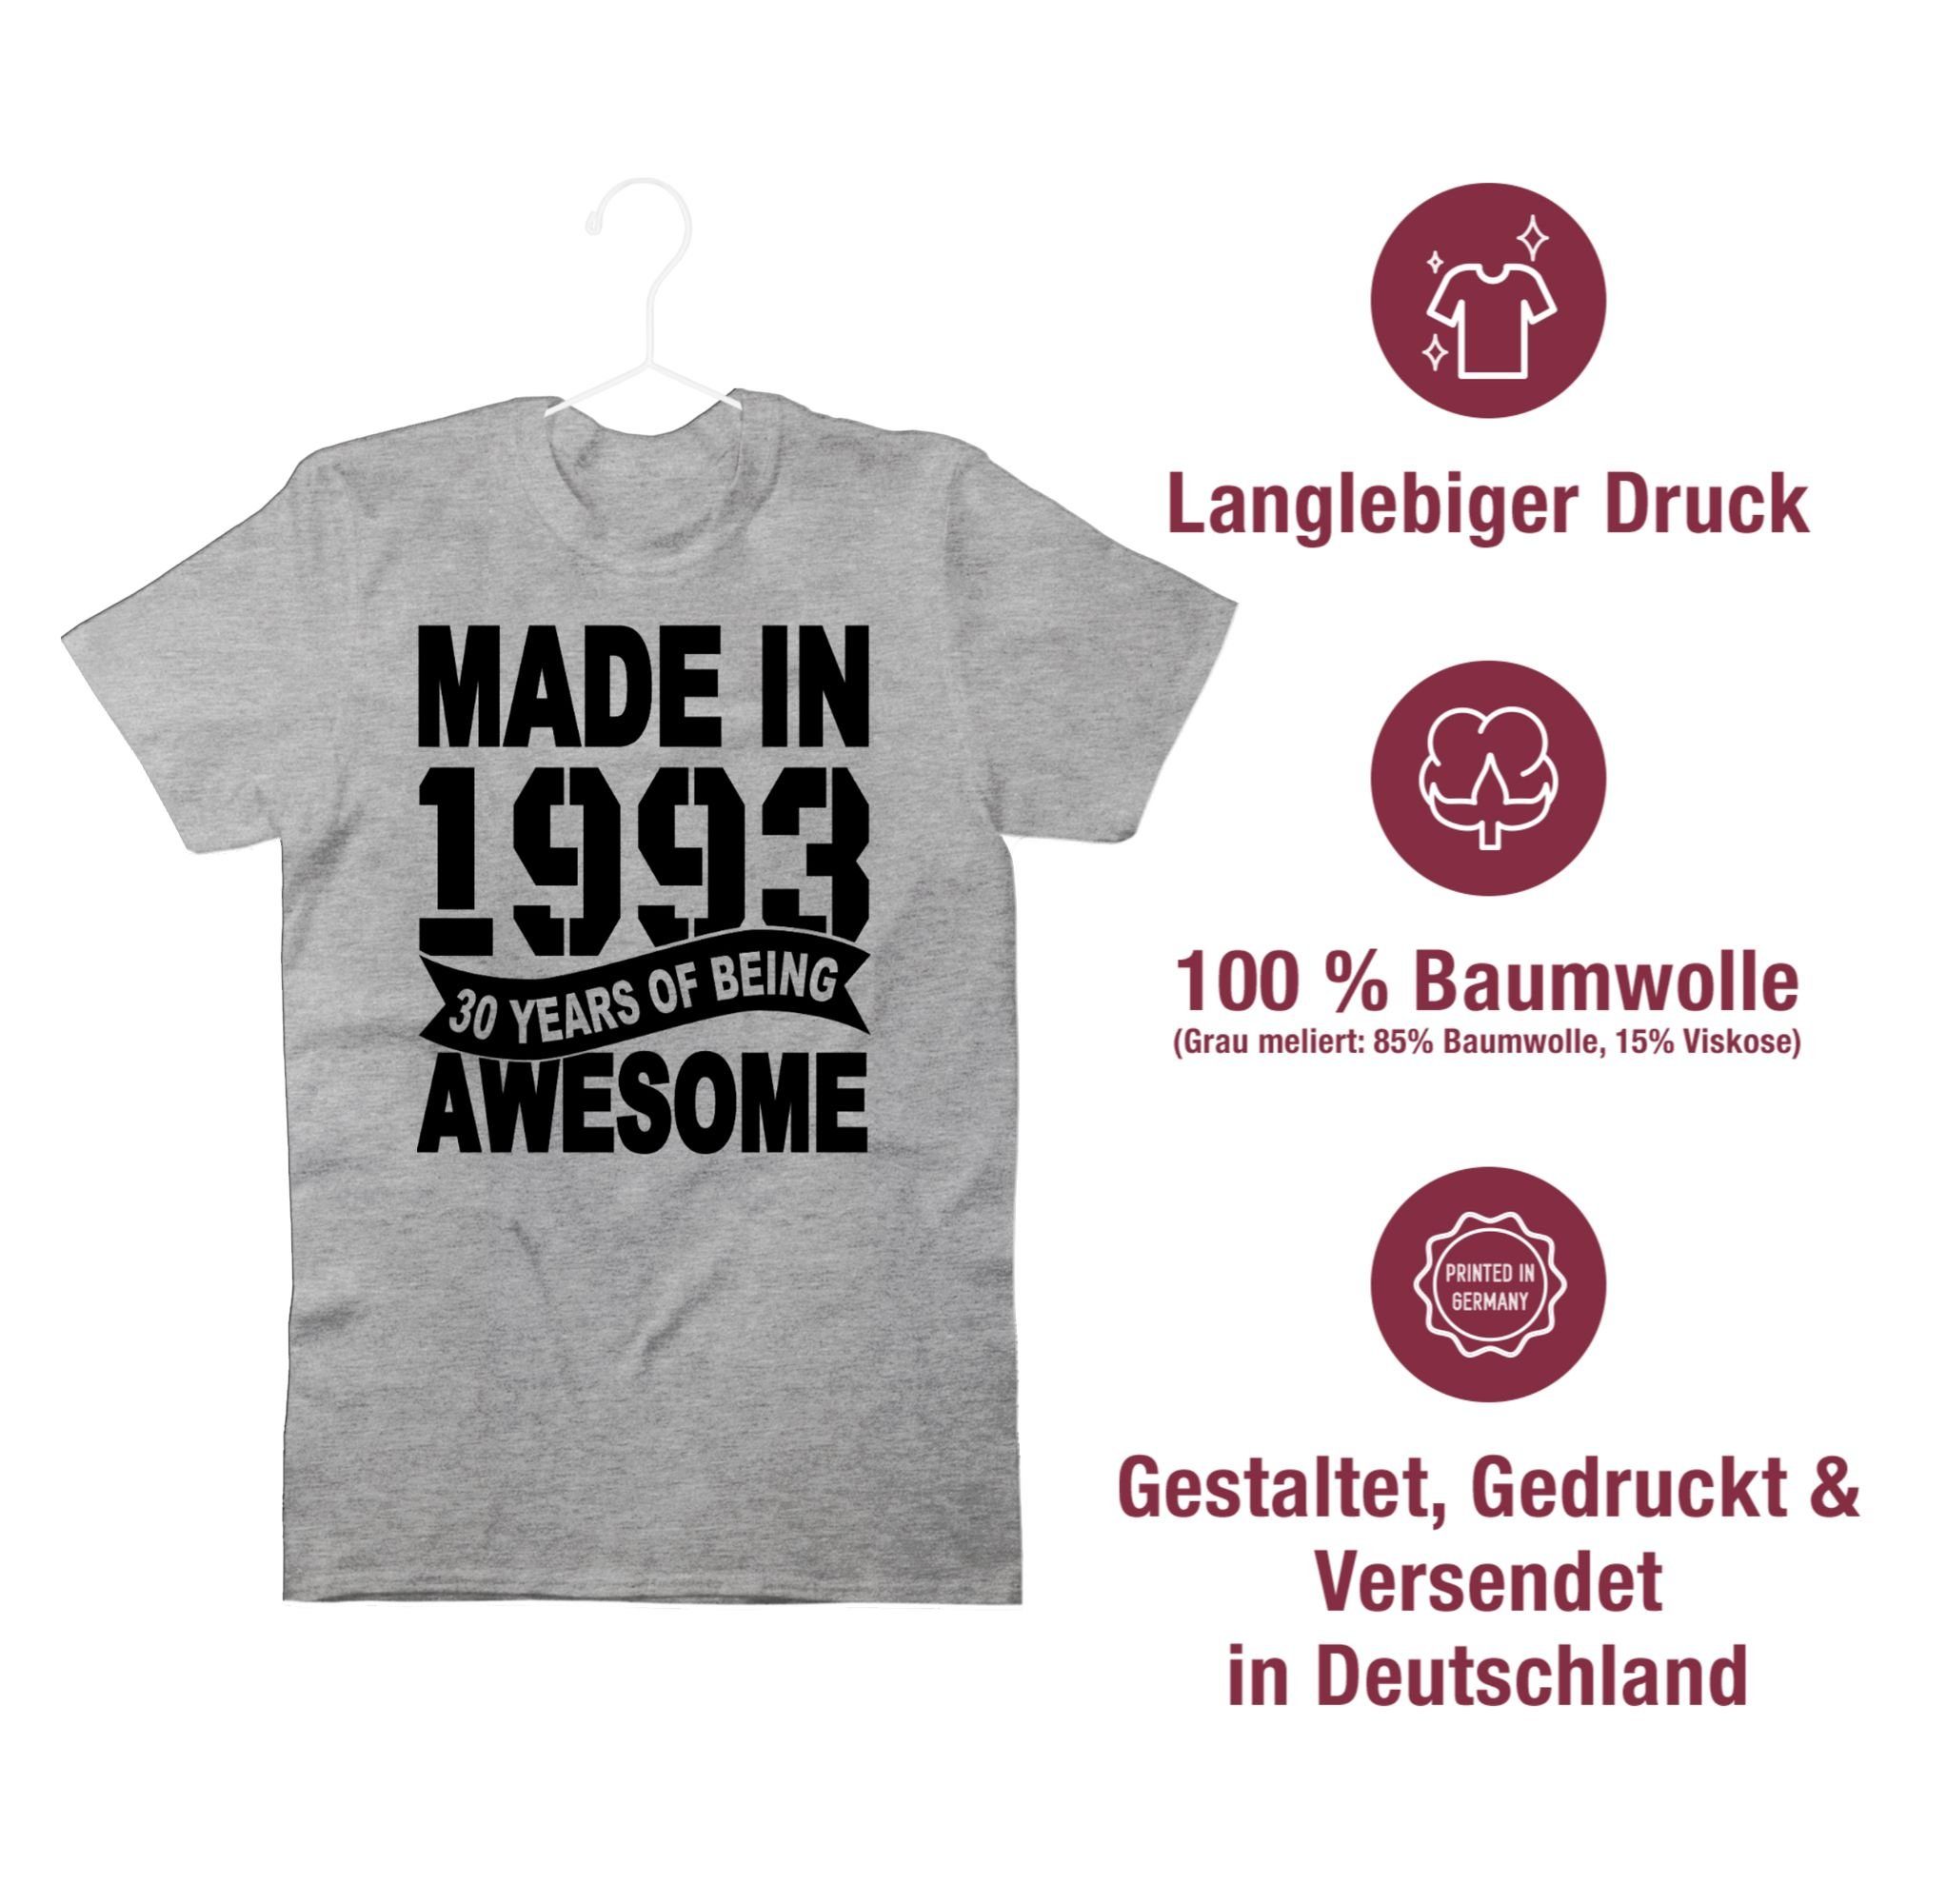 Shirtracer T-Shirt Made meliert schwarz in Thirty 3 of being awesome 1993 Grau 30. Geburtstag years